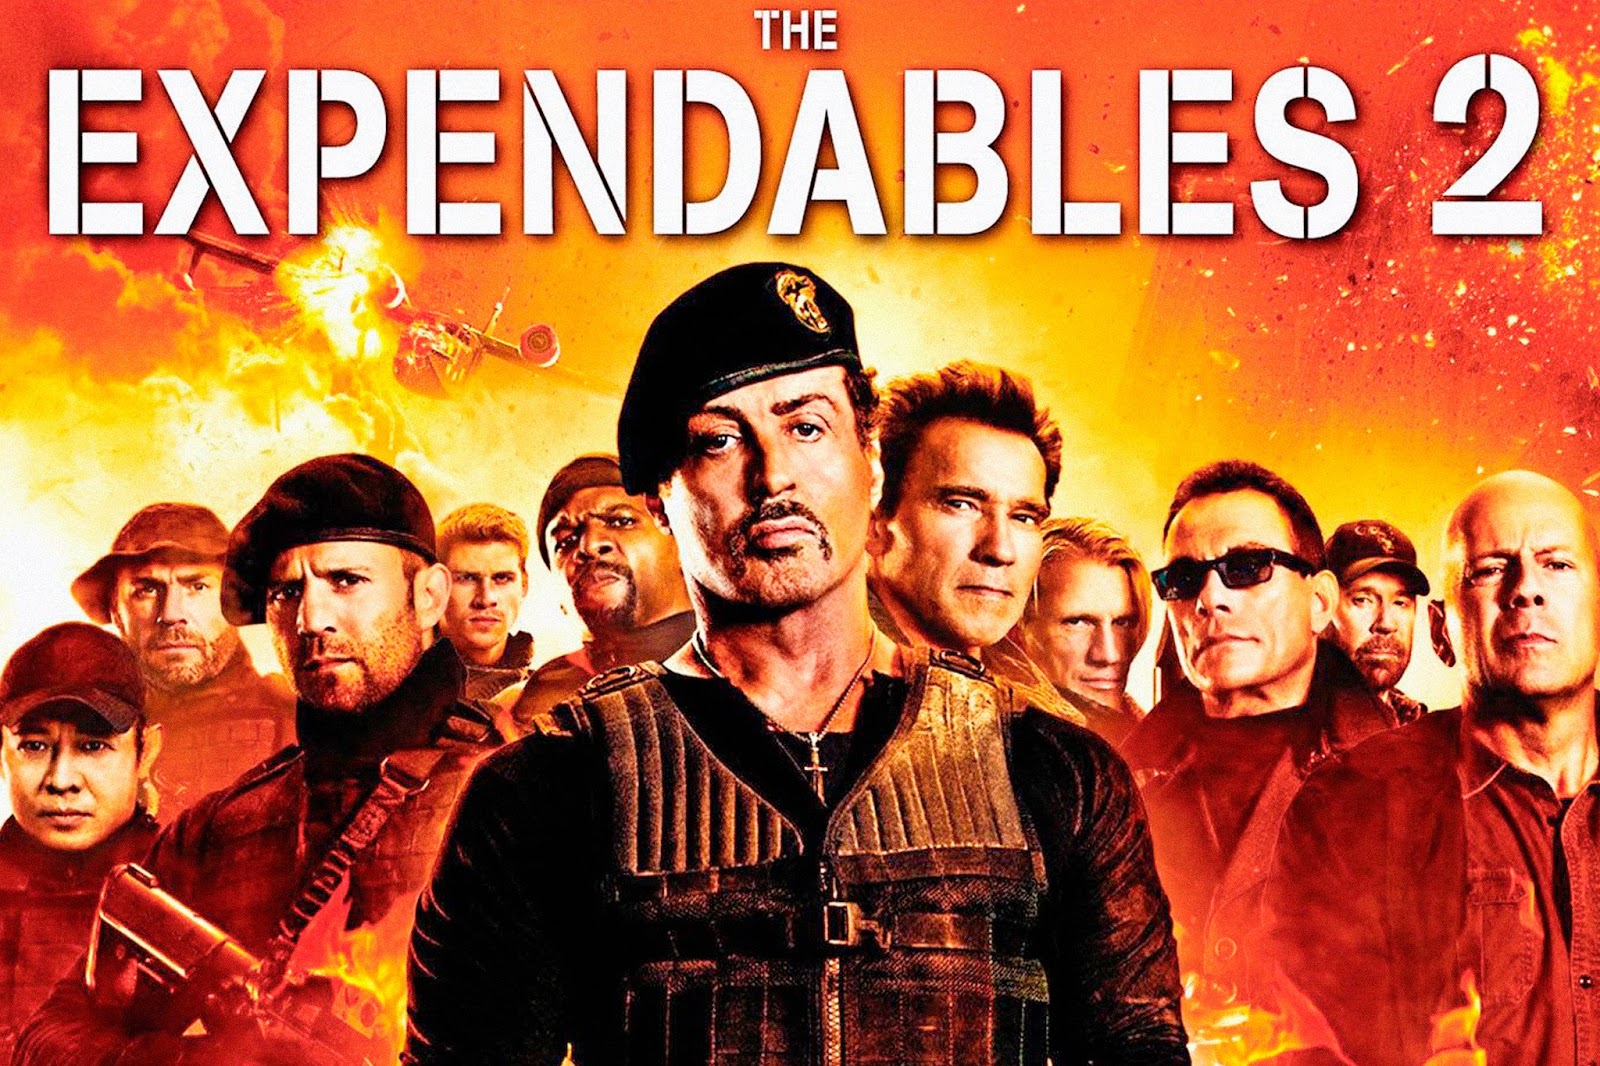 The Expendables 2 Backgrounds, Compatible - PC, Mobile, Gadgets| 1600x1066 px